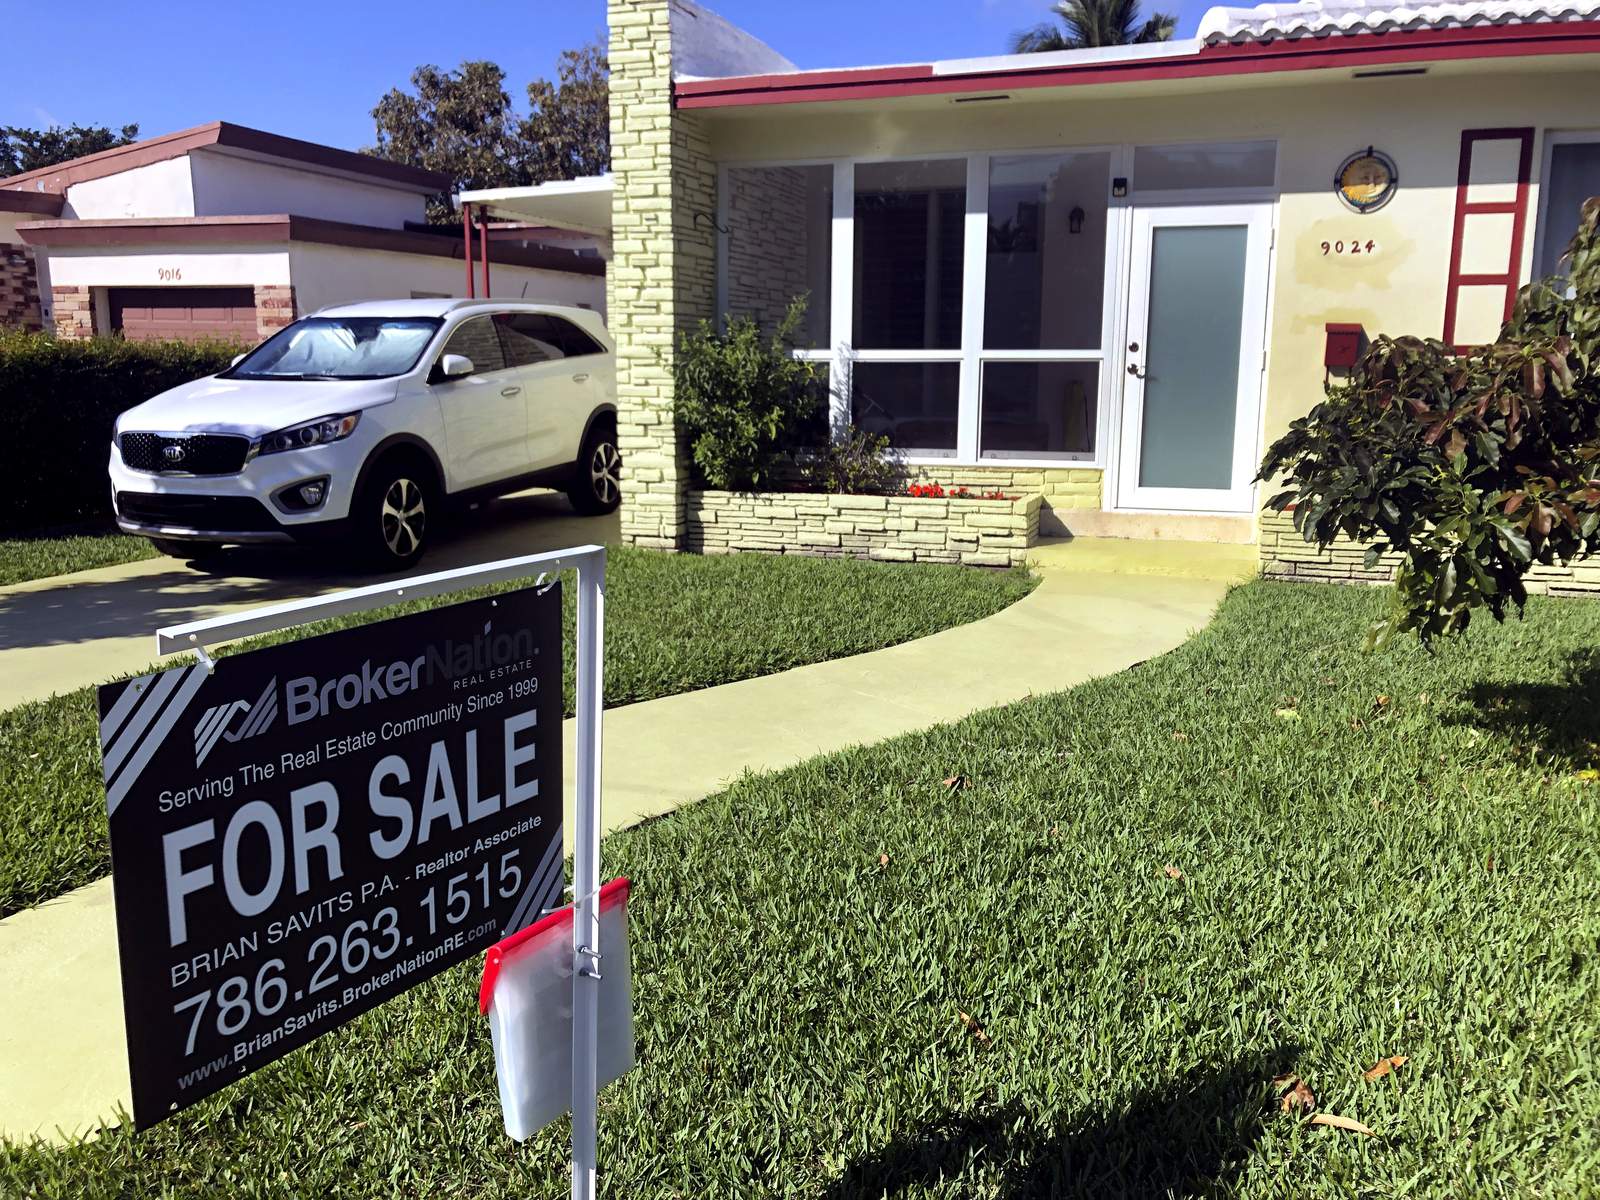 Study shows Miami is the fifth least affordable large city to buy a home